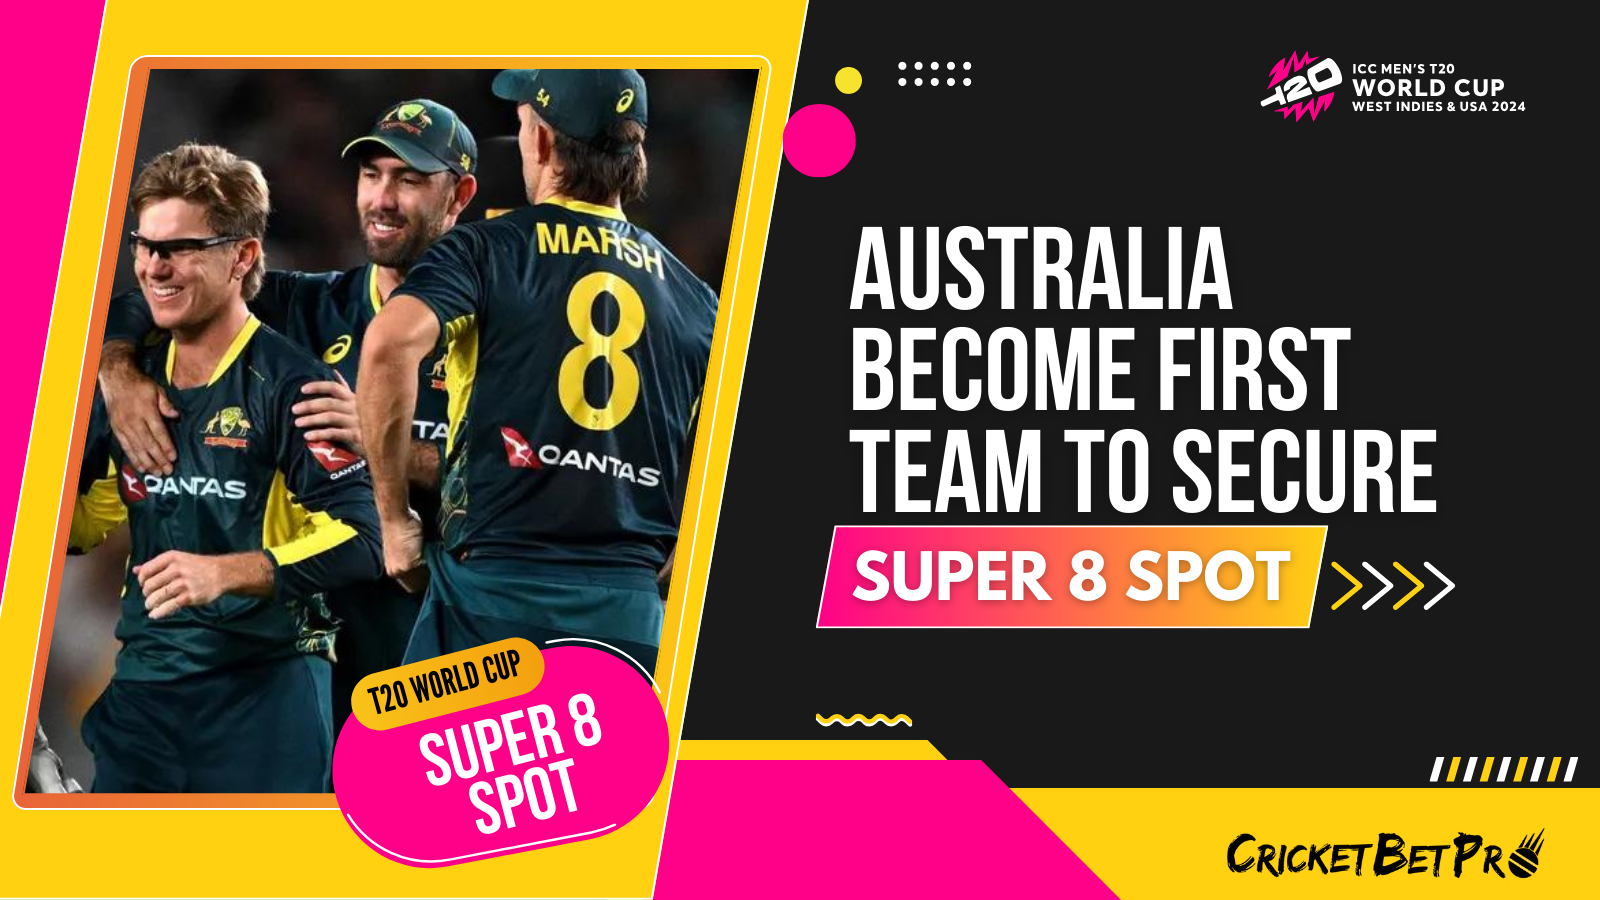 Australia Become First Team to Secure Super 8 Spot